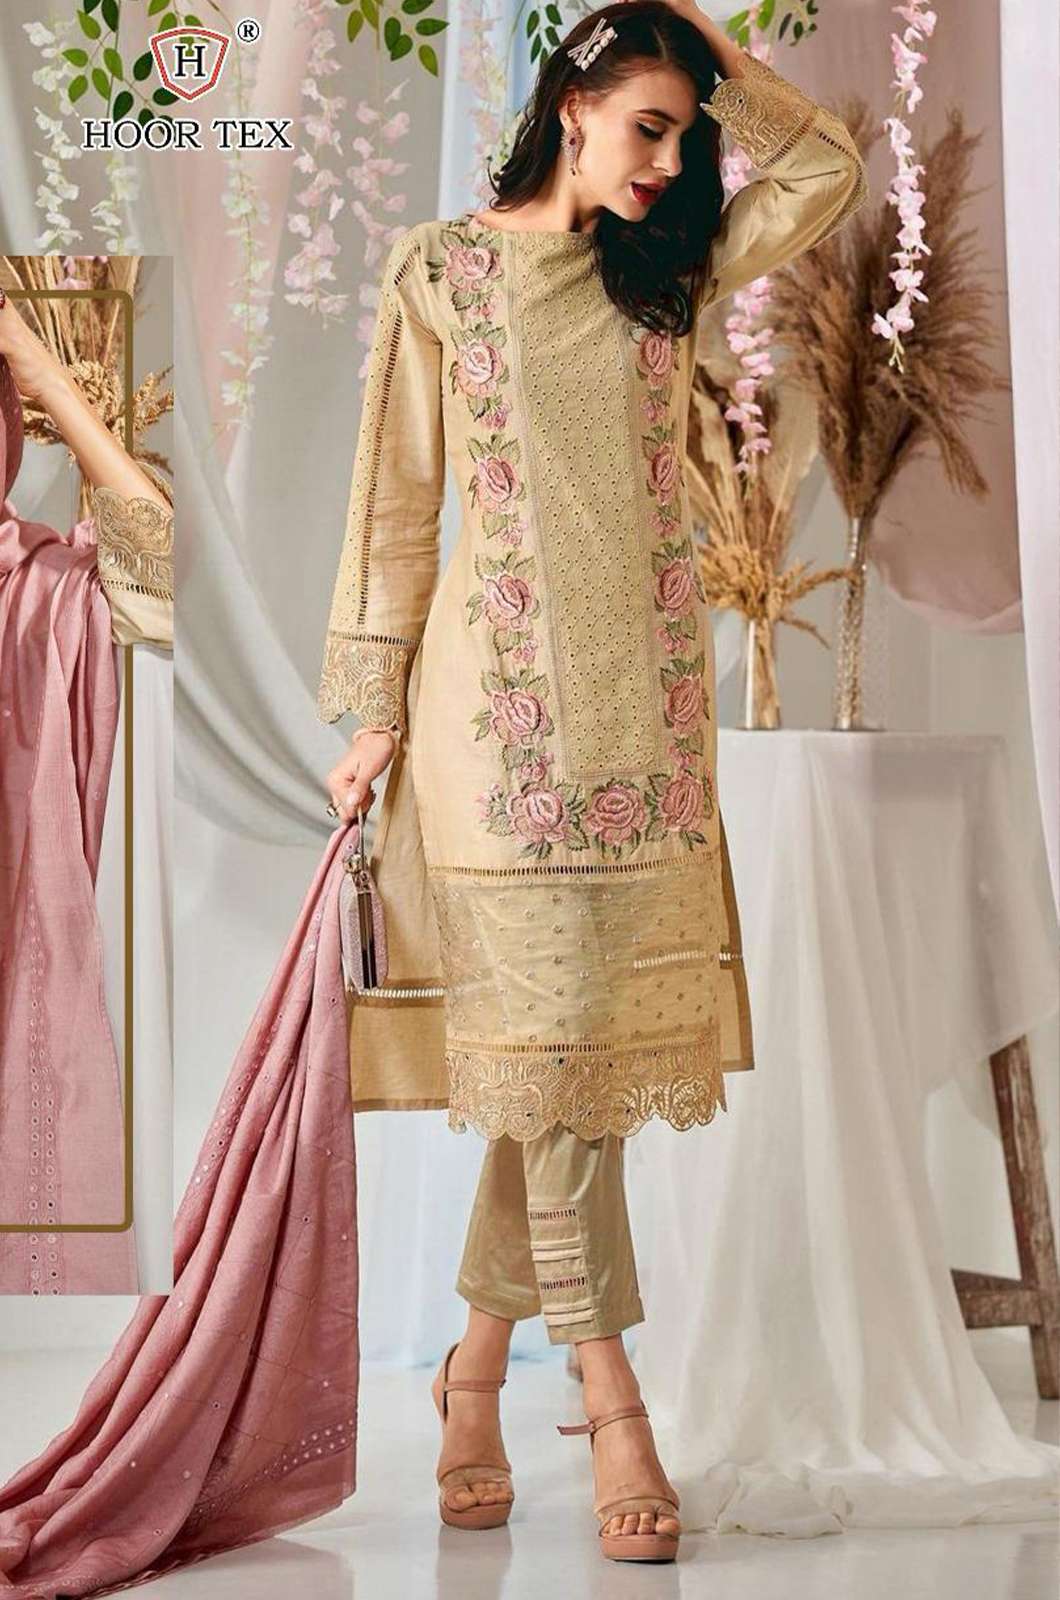 HOOR TEX HF 24 A To D 311m Embroiderd Pure Cotton Pakistani Suit